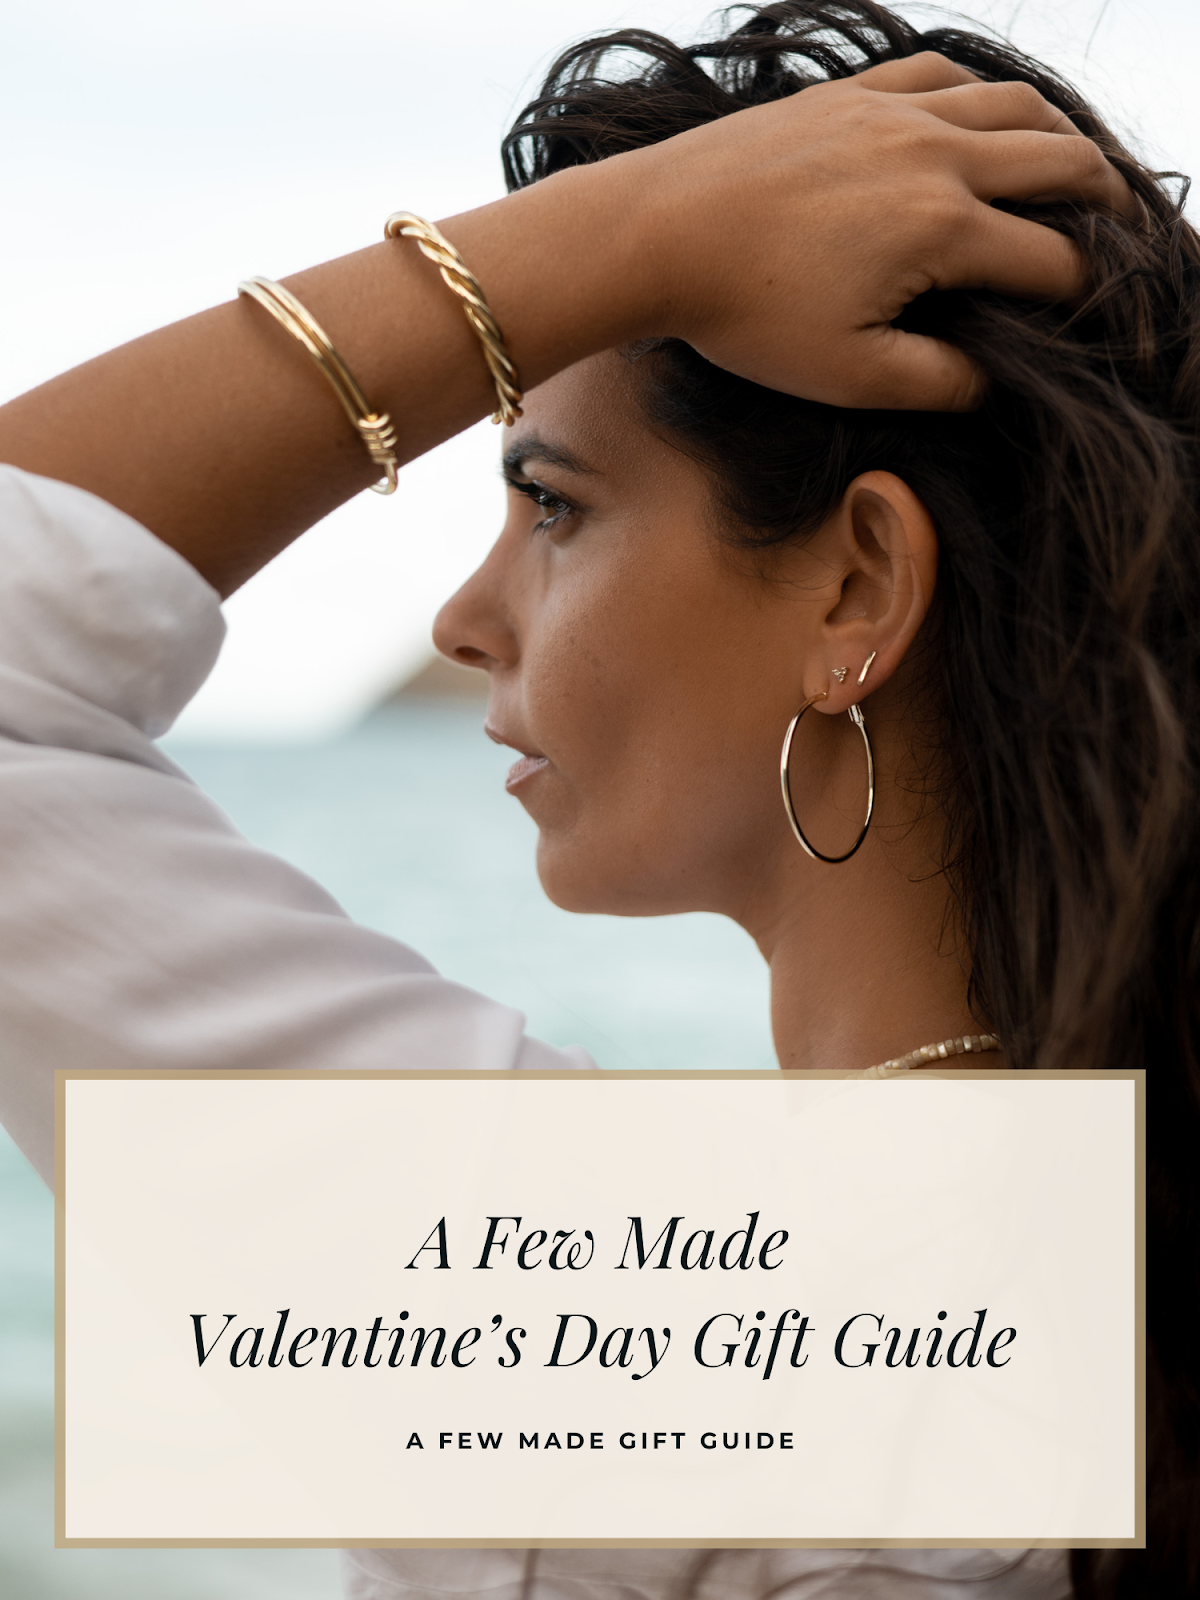 A Few Made Valentine’s Day Gift Guide